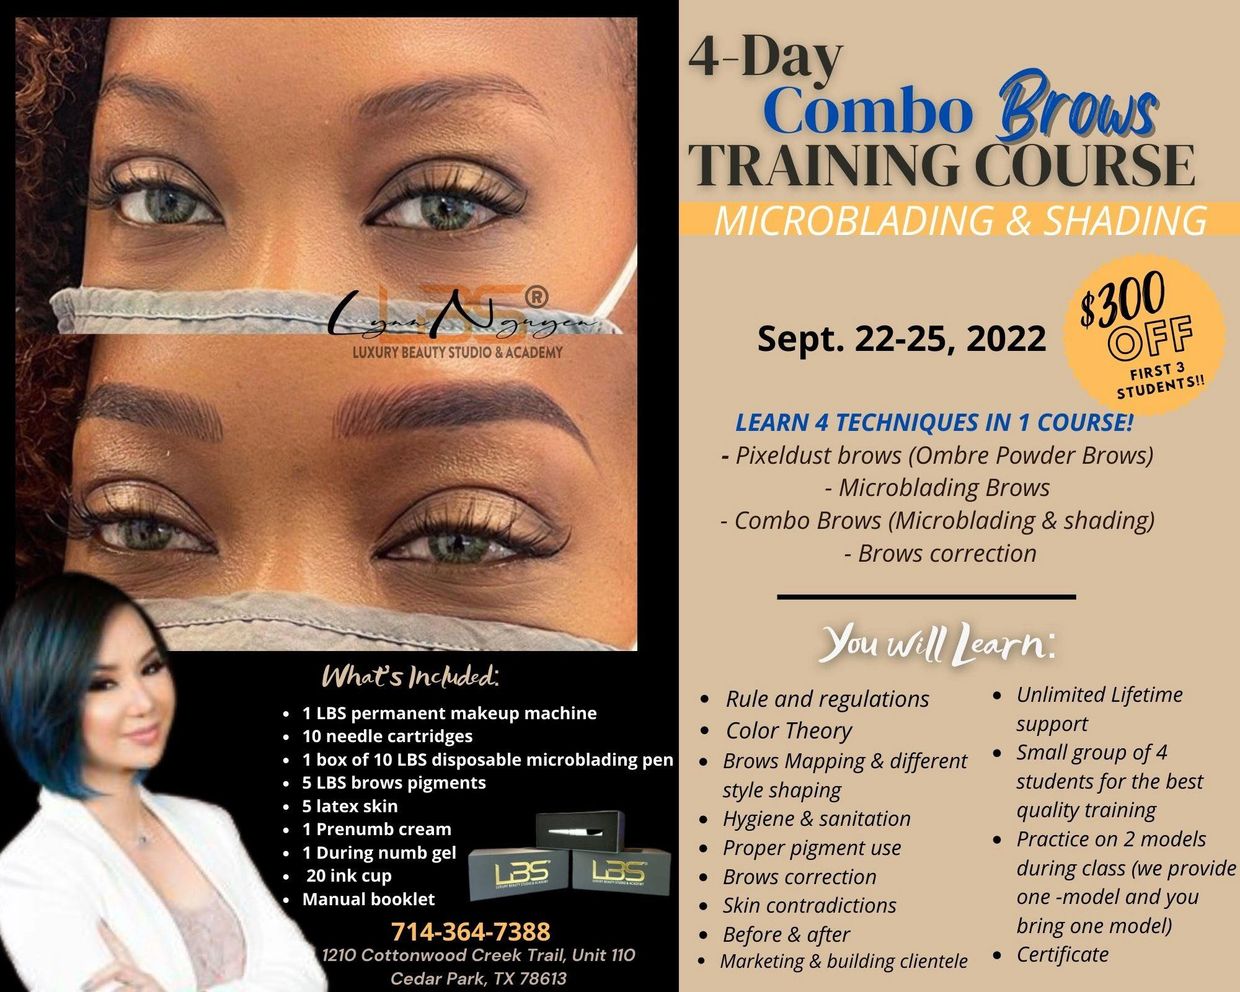 4 Techniques Eyebrows training. Pixeldust brows, Microblading, MicroShading and Brows correction.